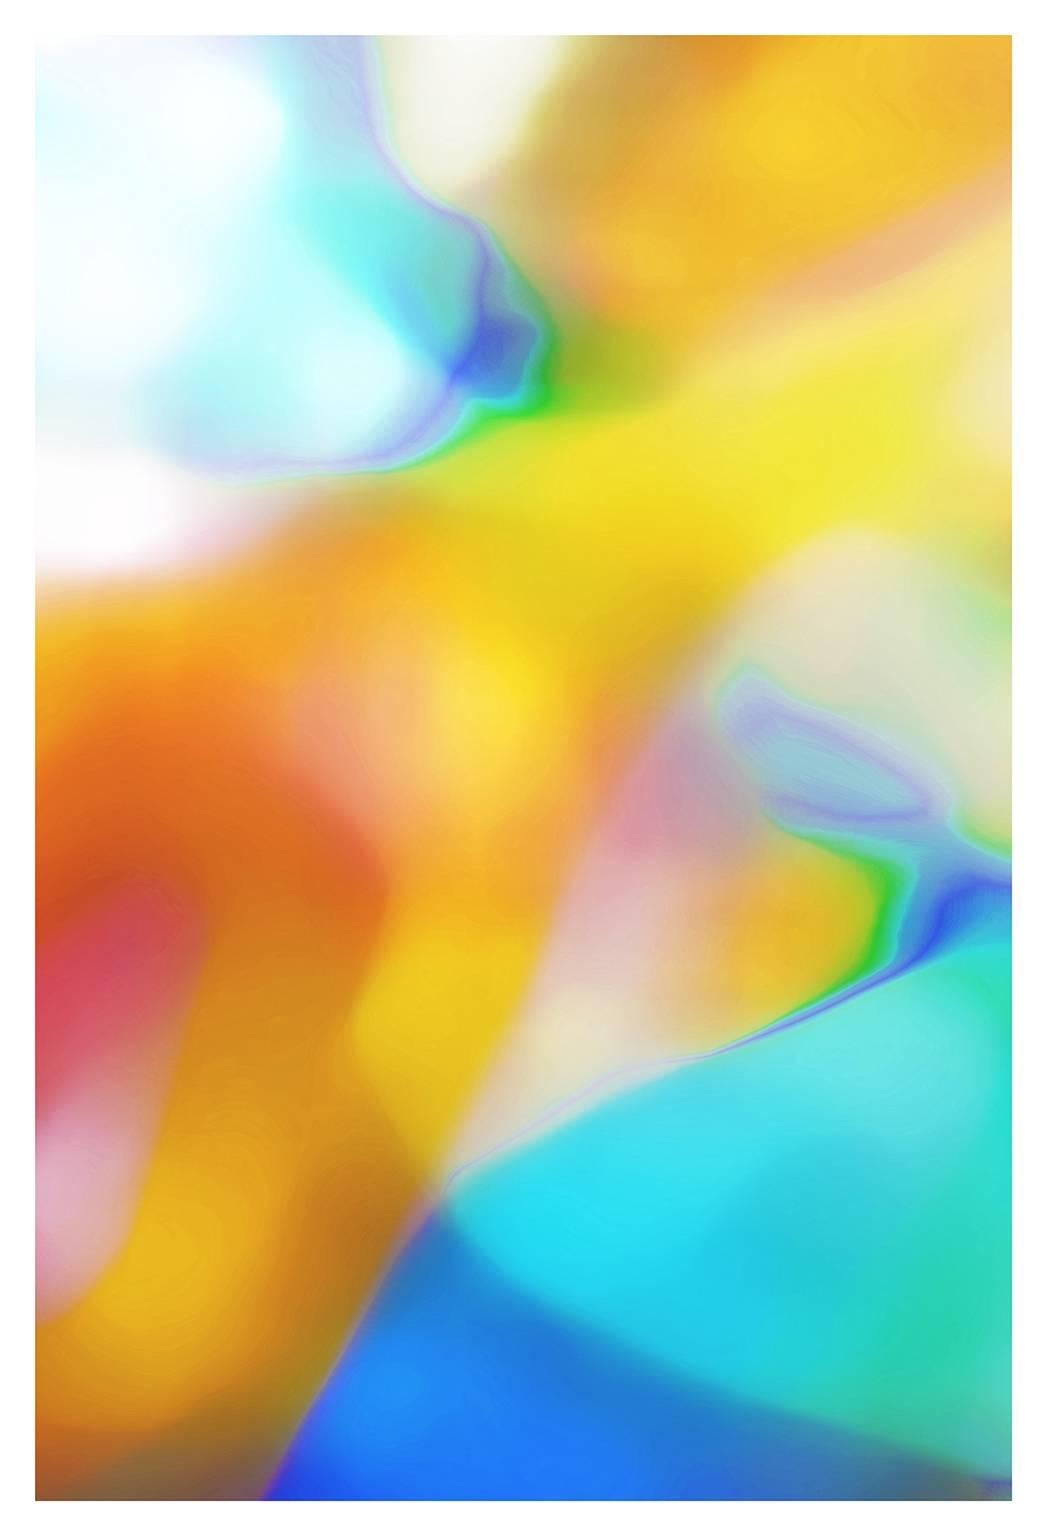 Cate Woodruff Abstract Photograph - "Space Between Violet" photographs blue greens, yellows, dissolved in soft light